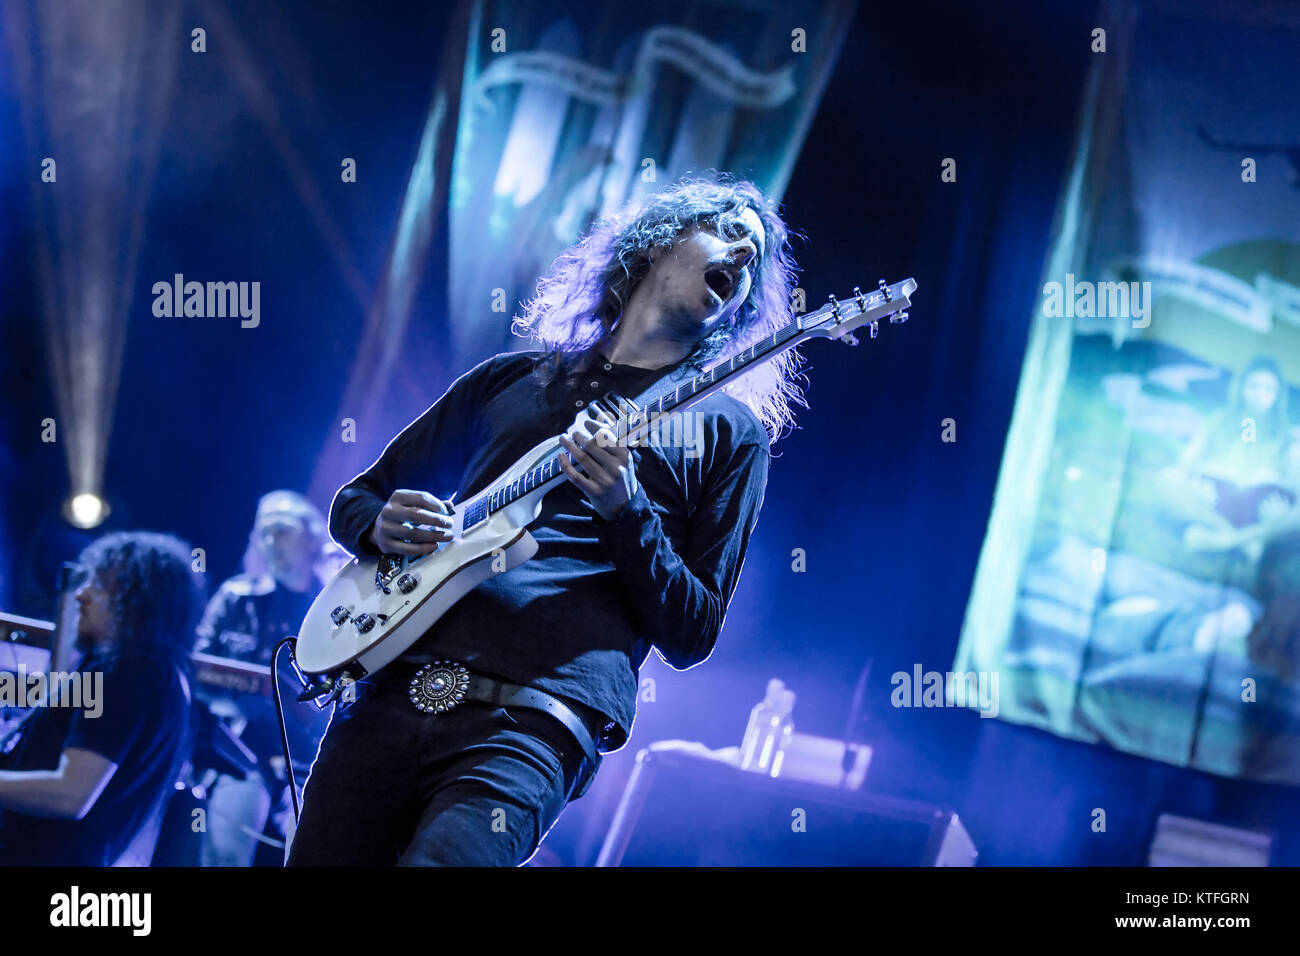 The progressive Swedish death metal band Opeth performs a live concert at the Norwegian music festival Tons of Rock 2015. Here vocalist and guitarist Mikael Åkerfeldt is seen live on stage. Norway, 18/06 2015. Stock Photo